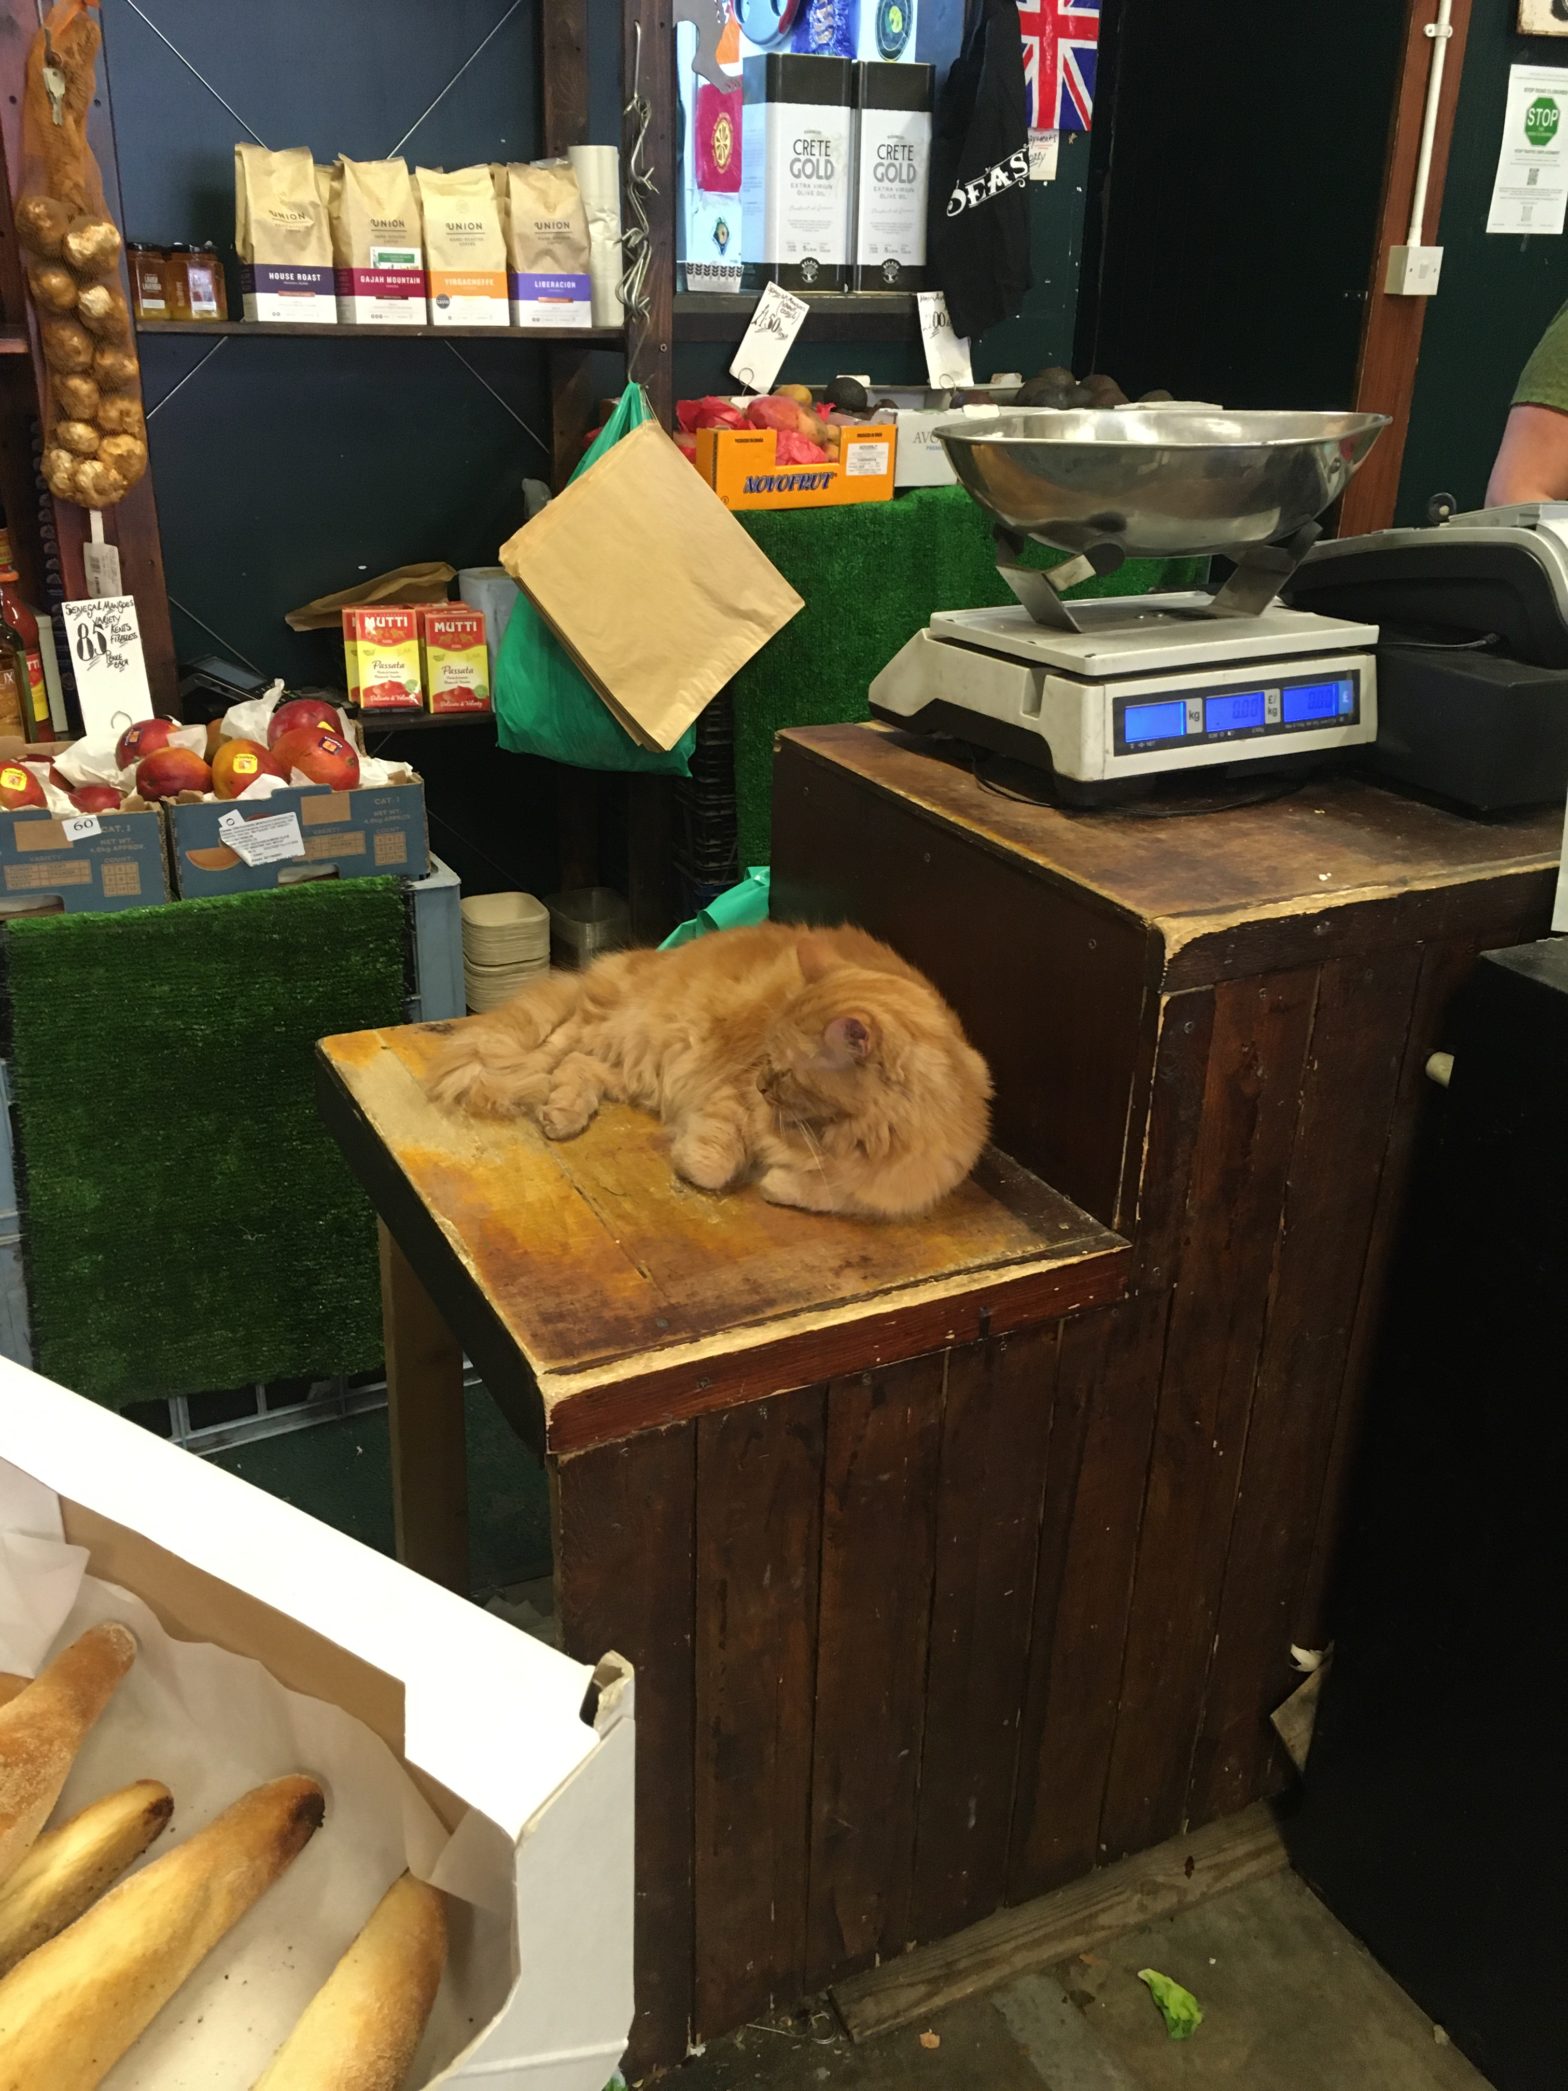 My local greengrocers and their cat.